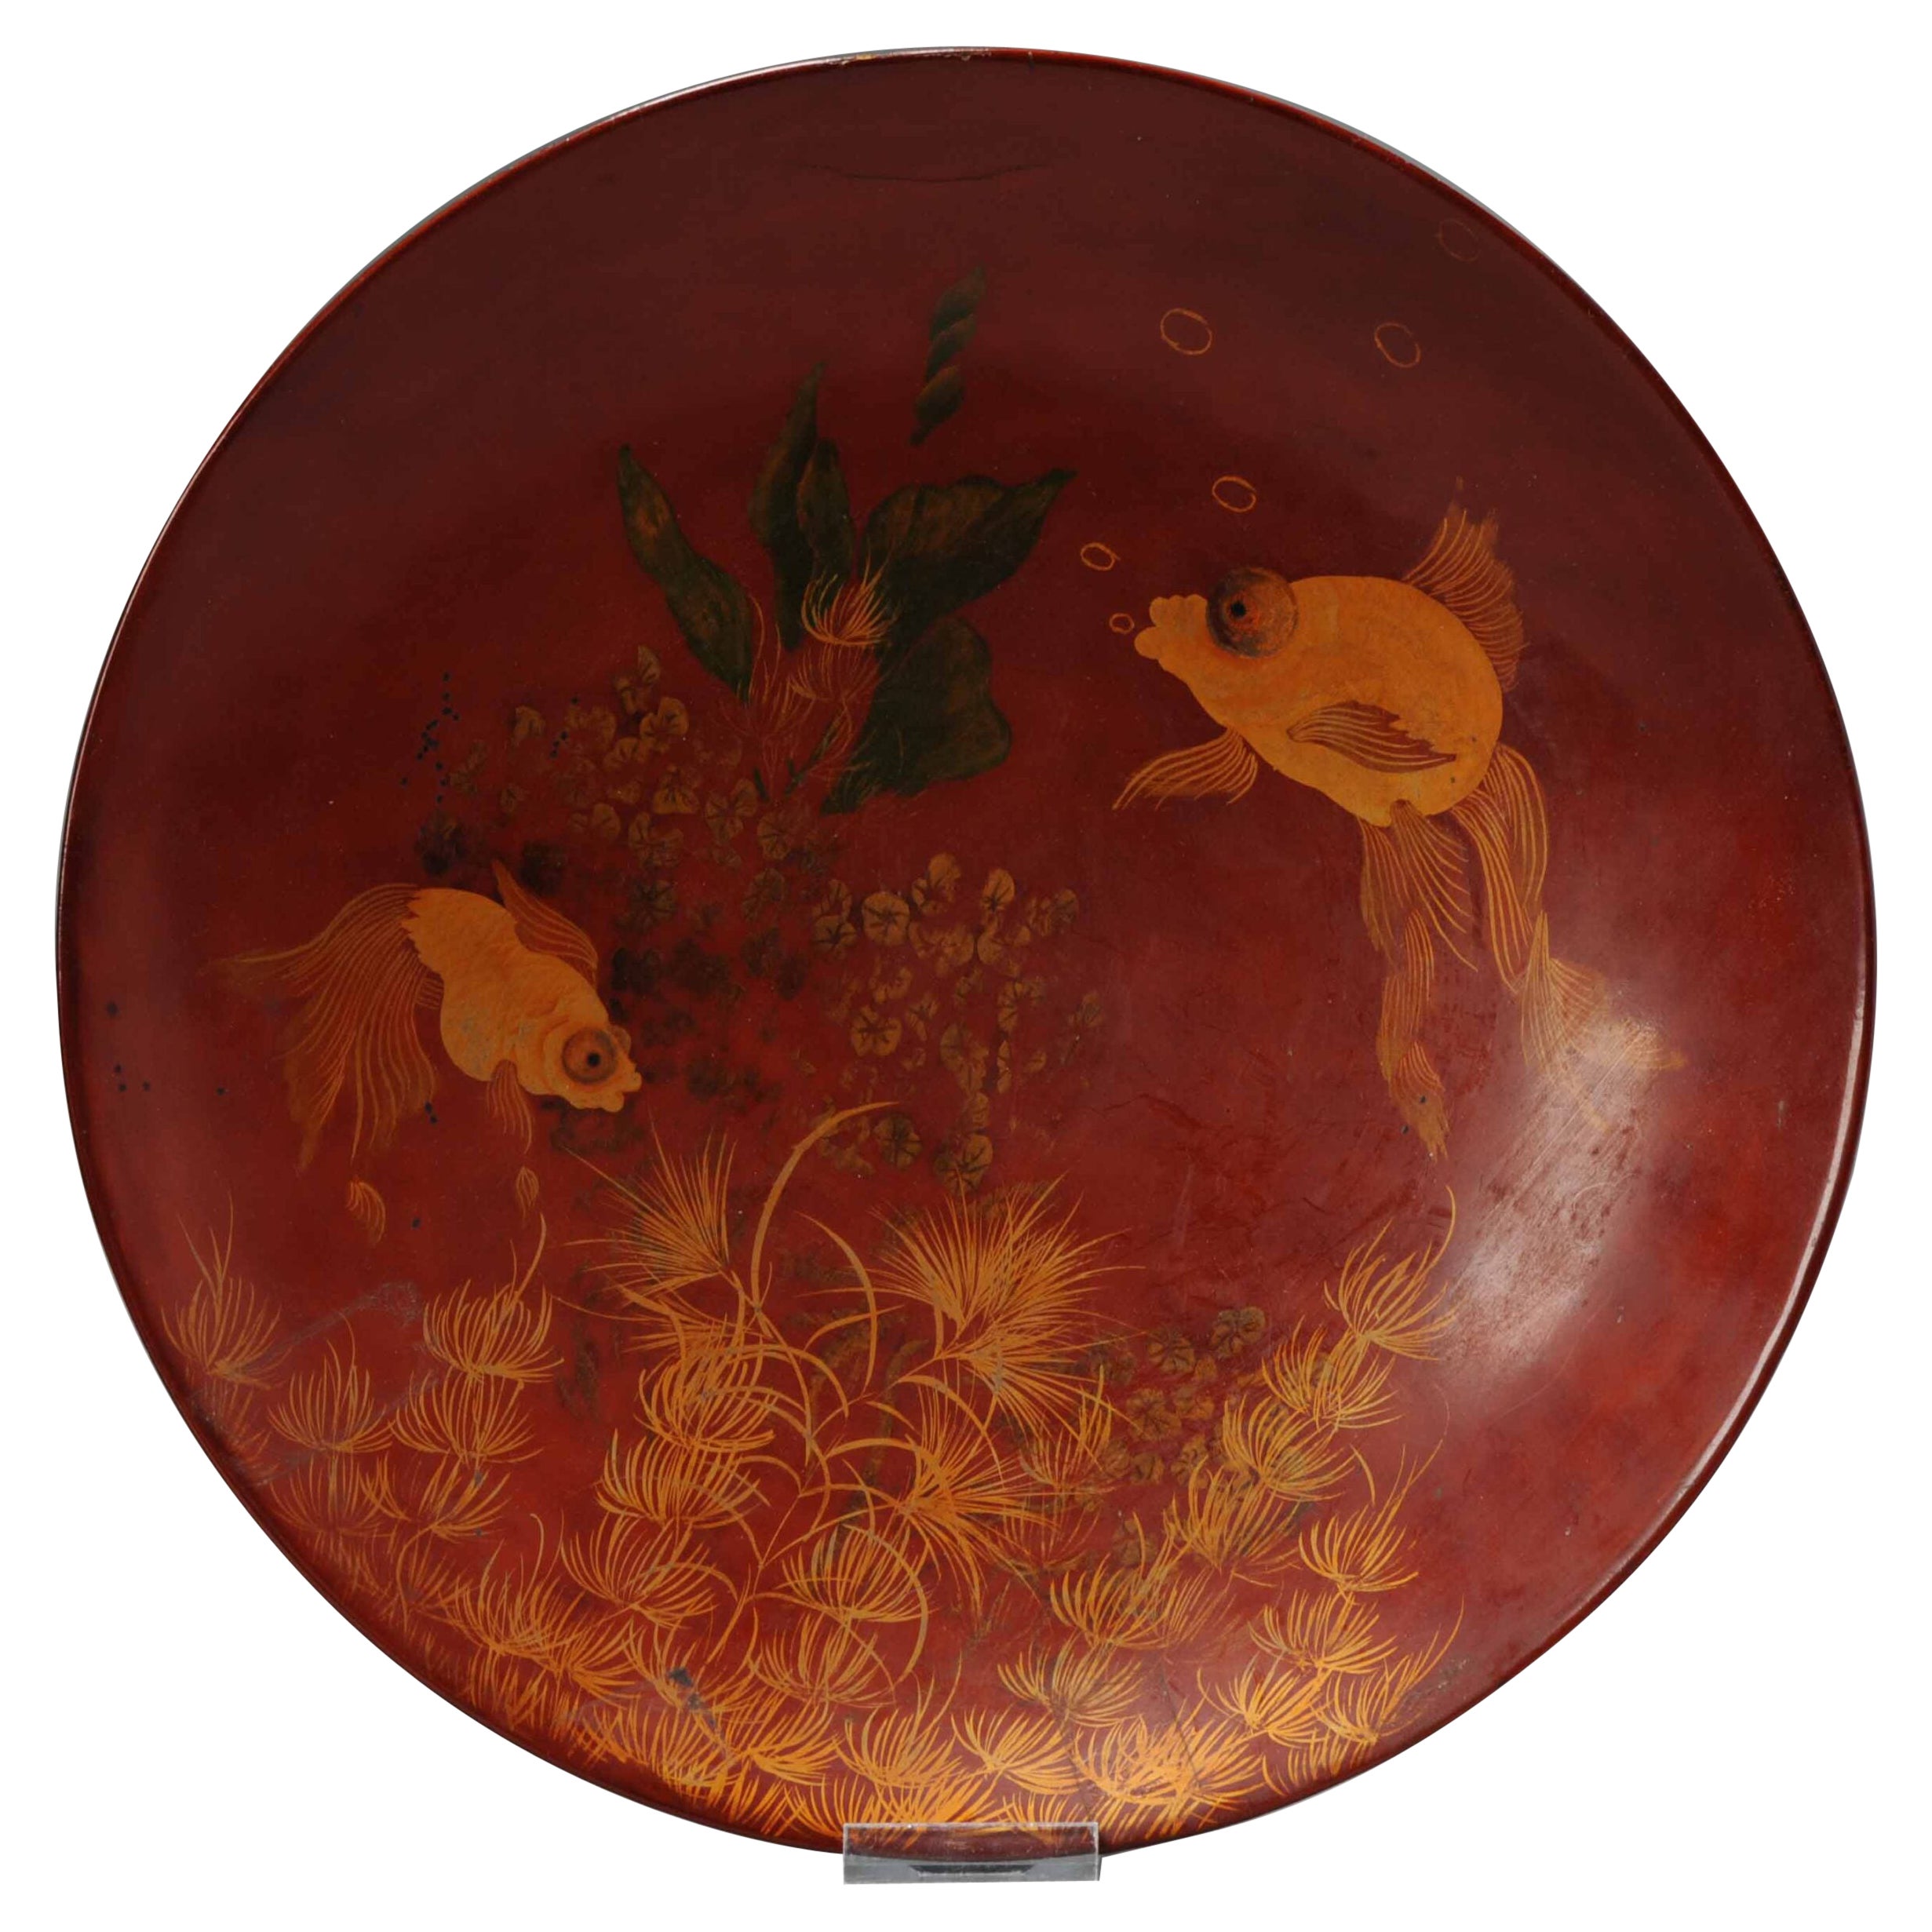 Vietnam / Indochine Circular Lacquered Wooden Plate Nguyen Duy For Sale